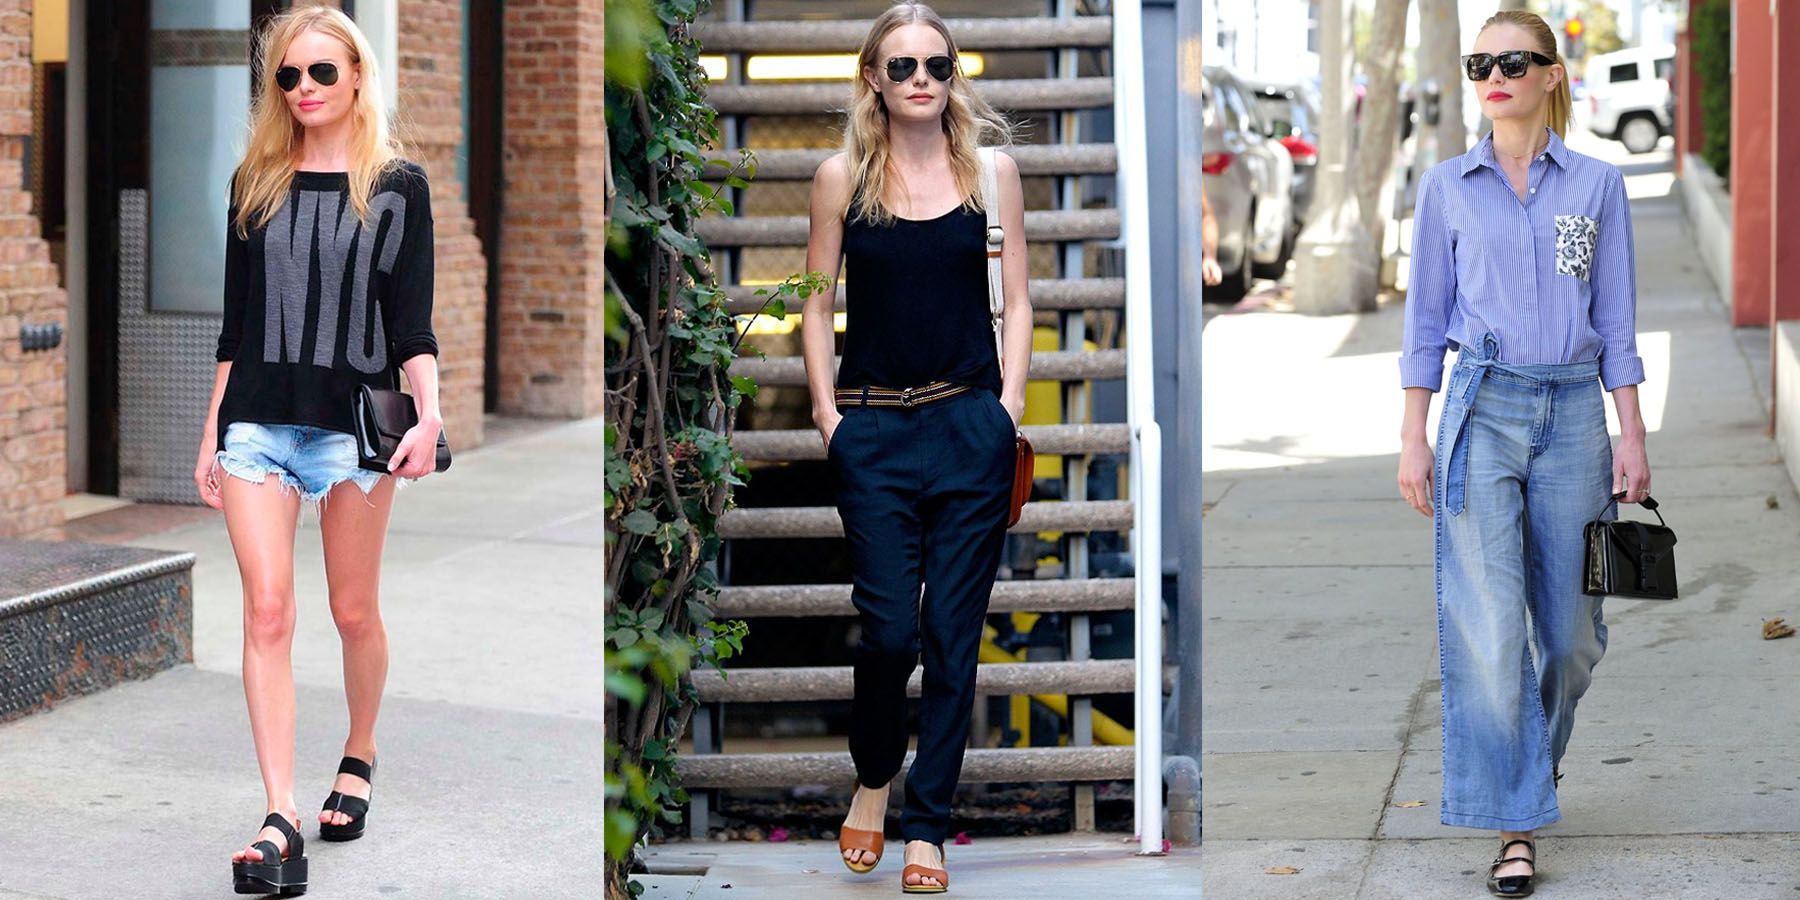 The Most Stunning Street Style from Kate Bosworth You Should Try